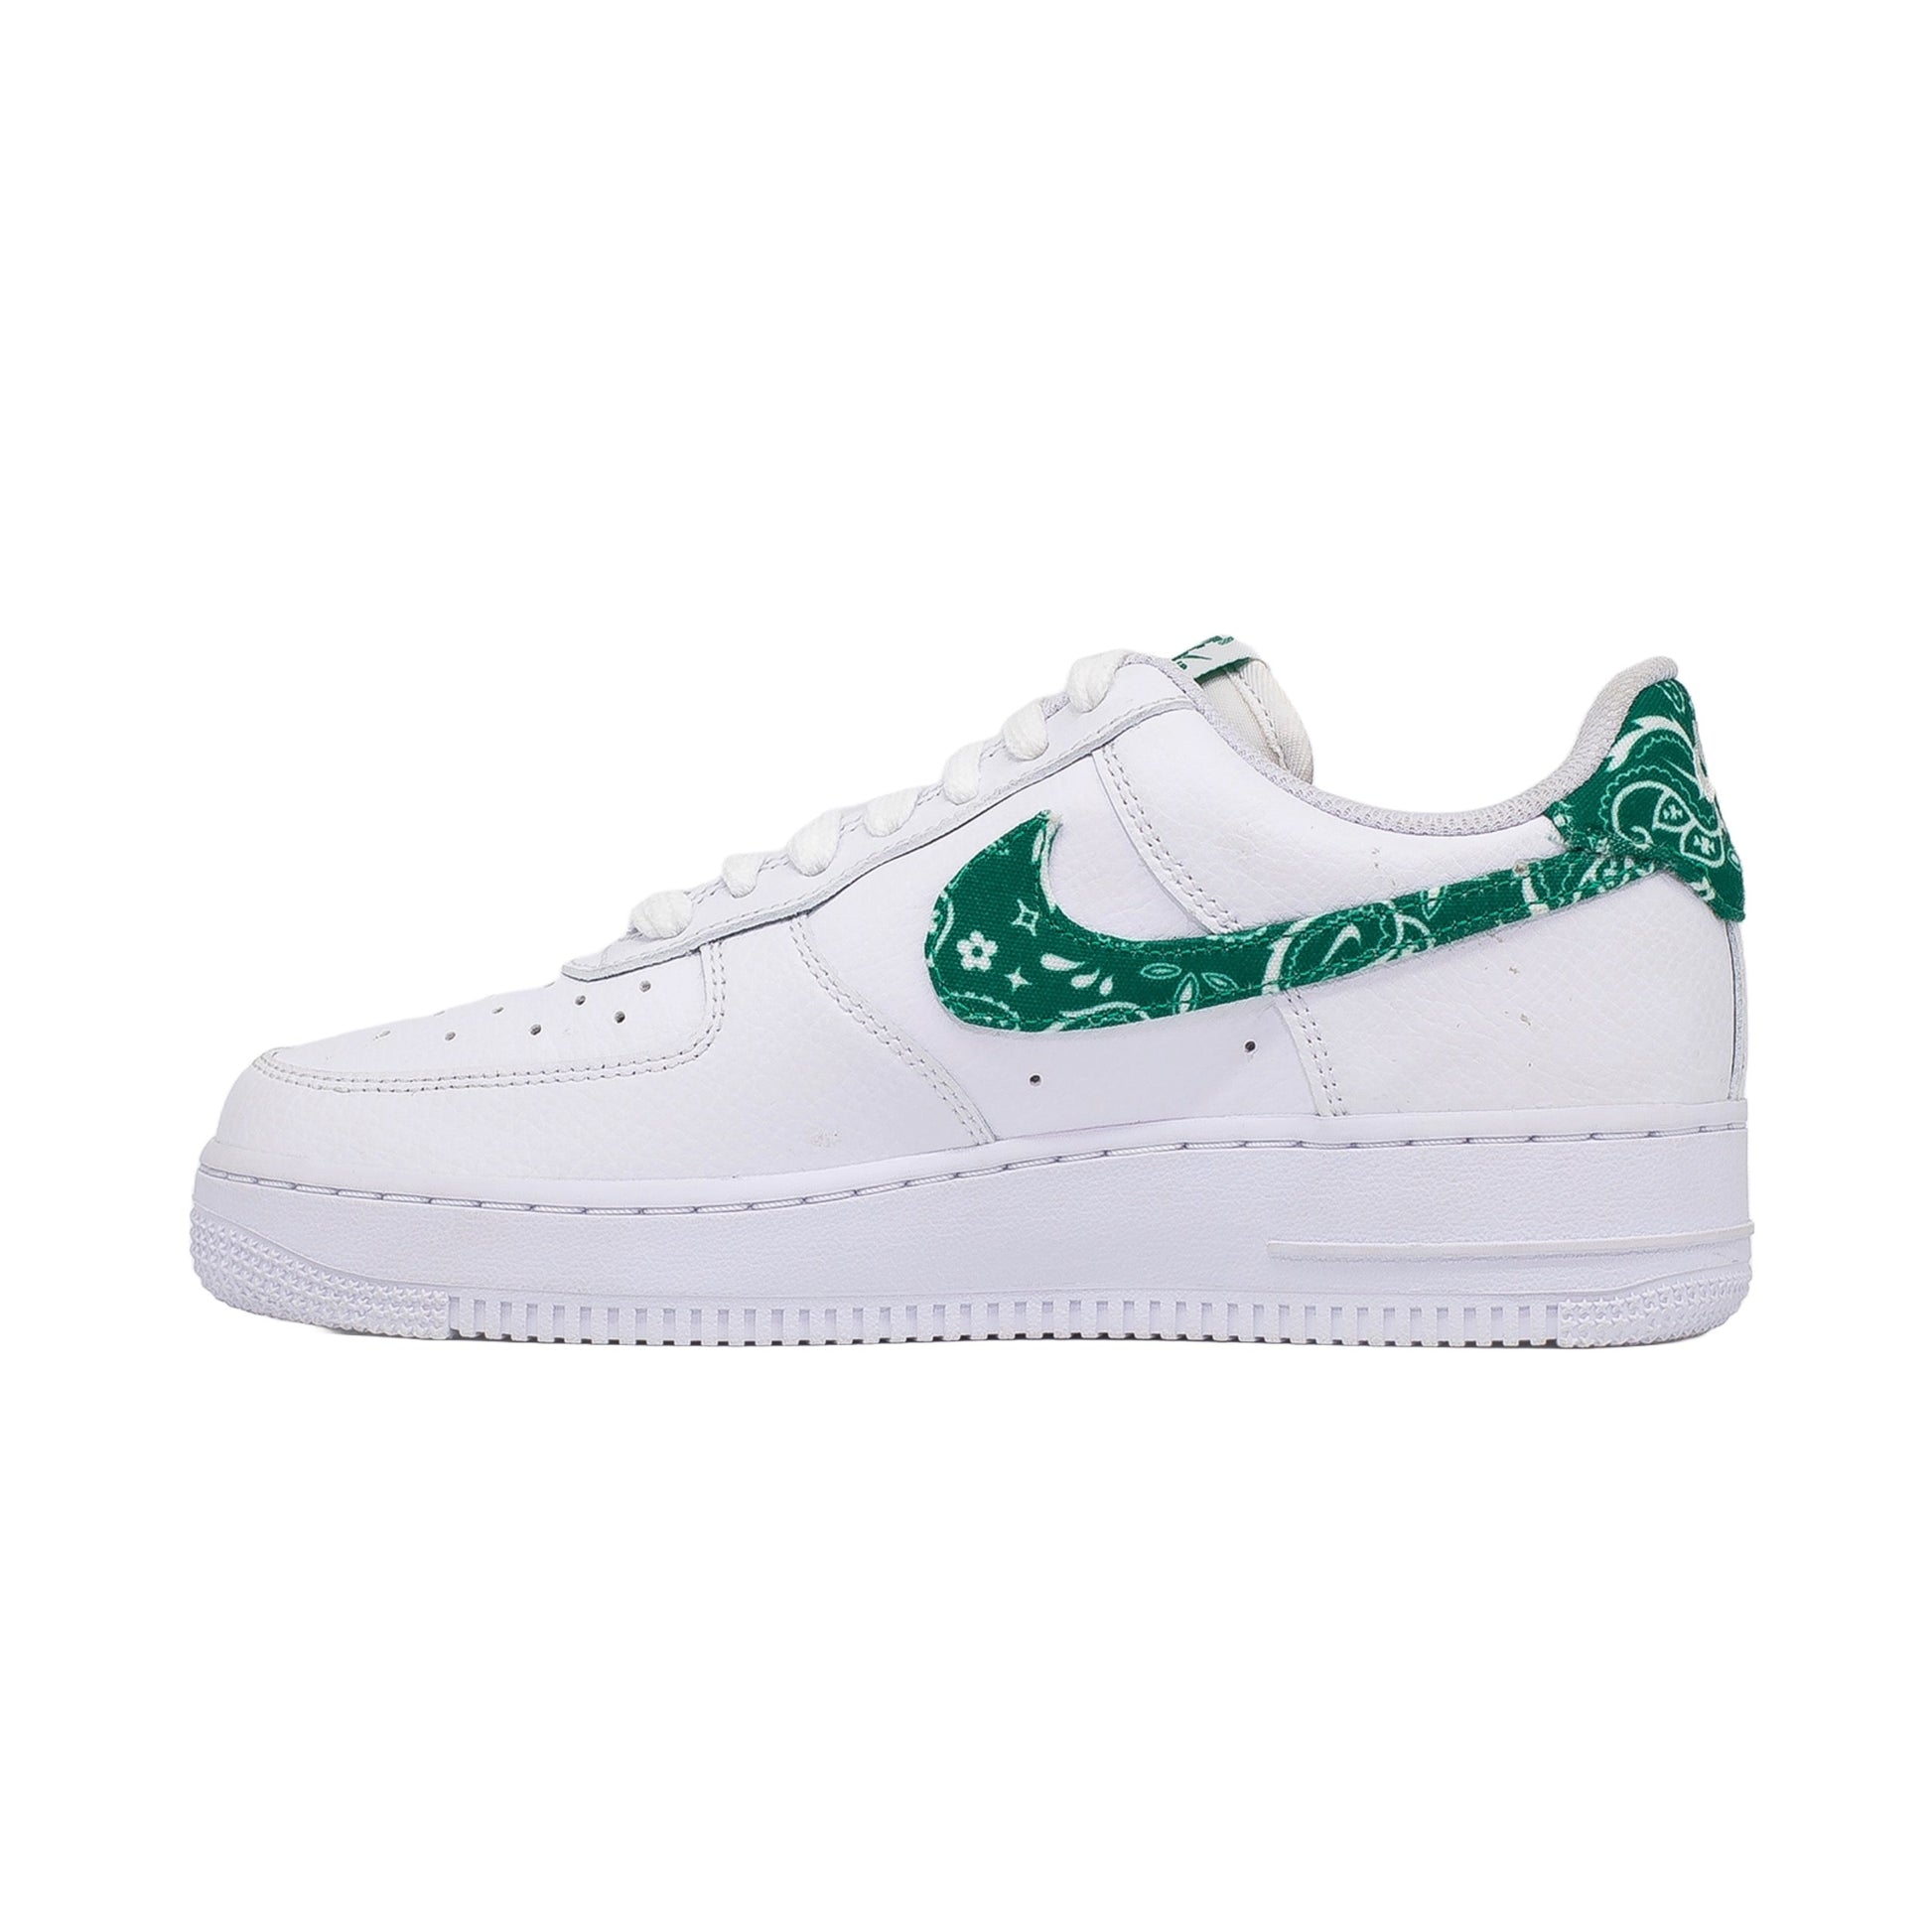 Women's Nike Air Force 1 Low, '07 Essentials Green Paisley